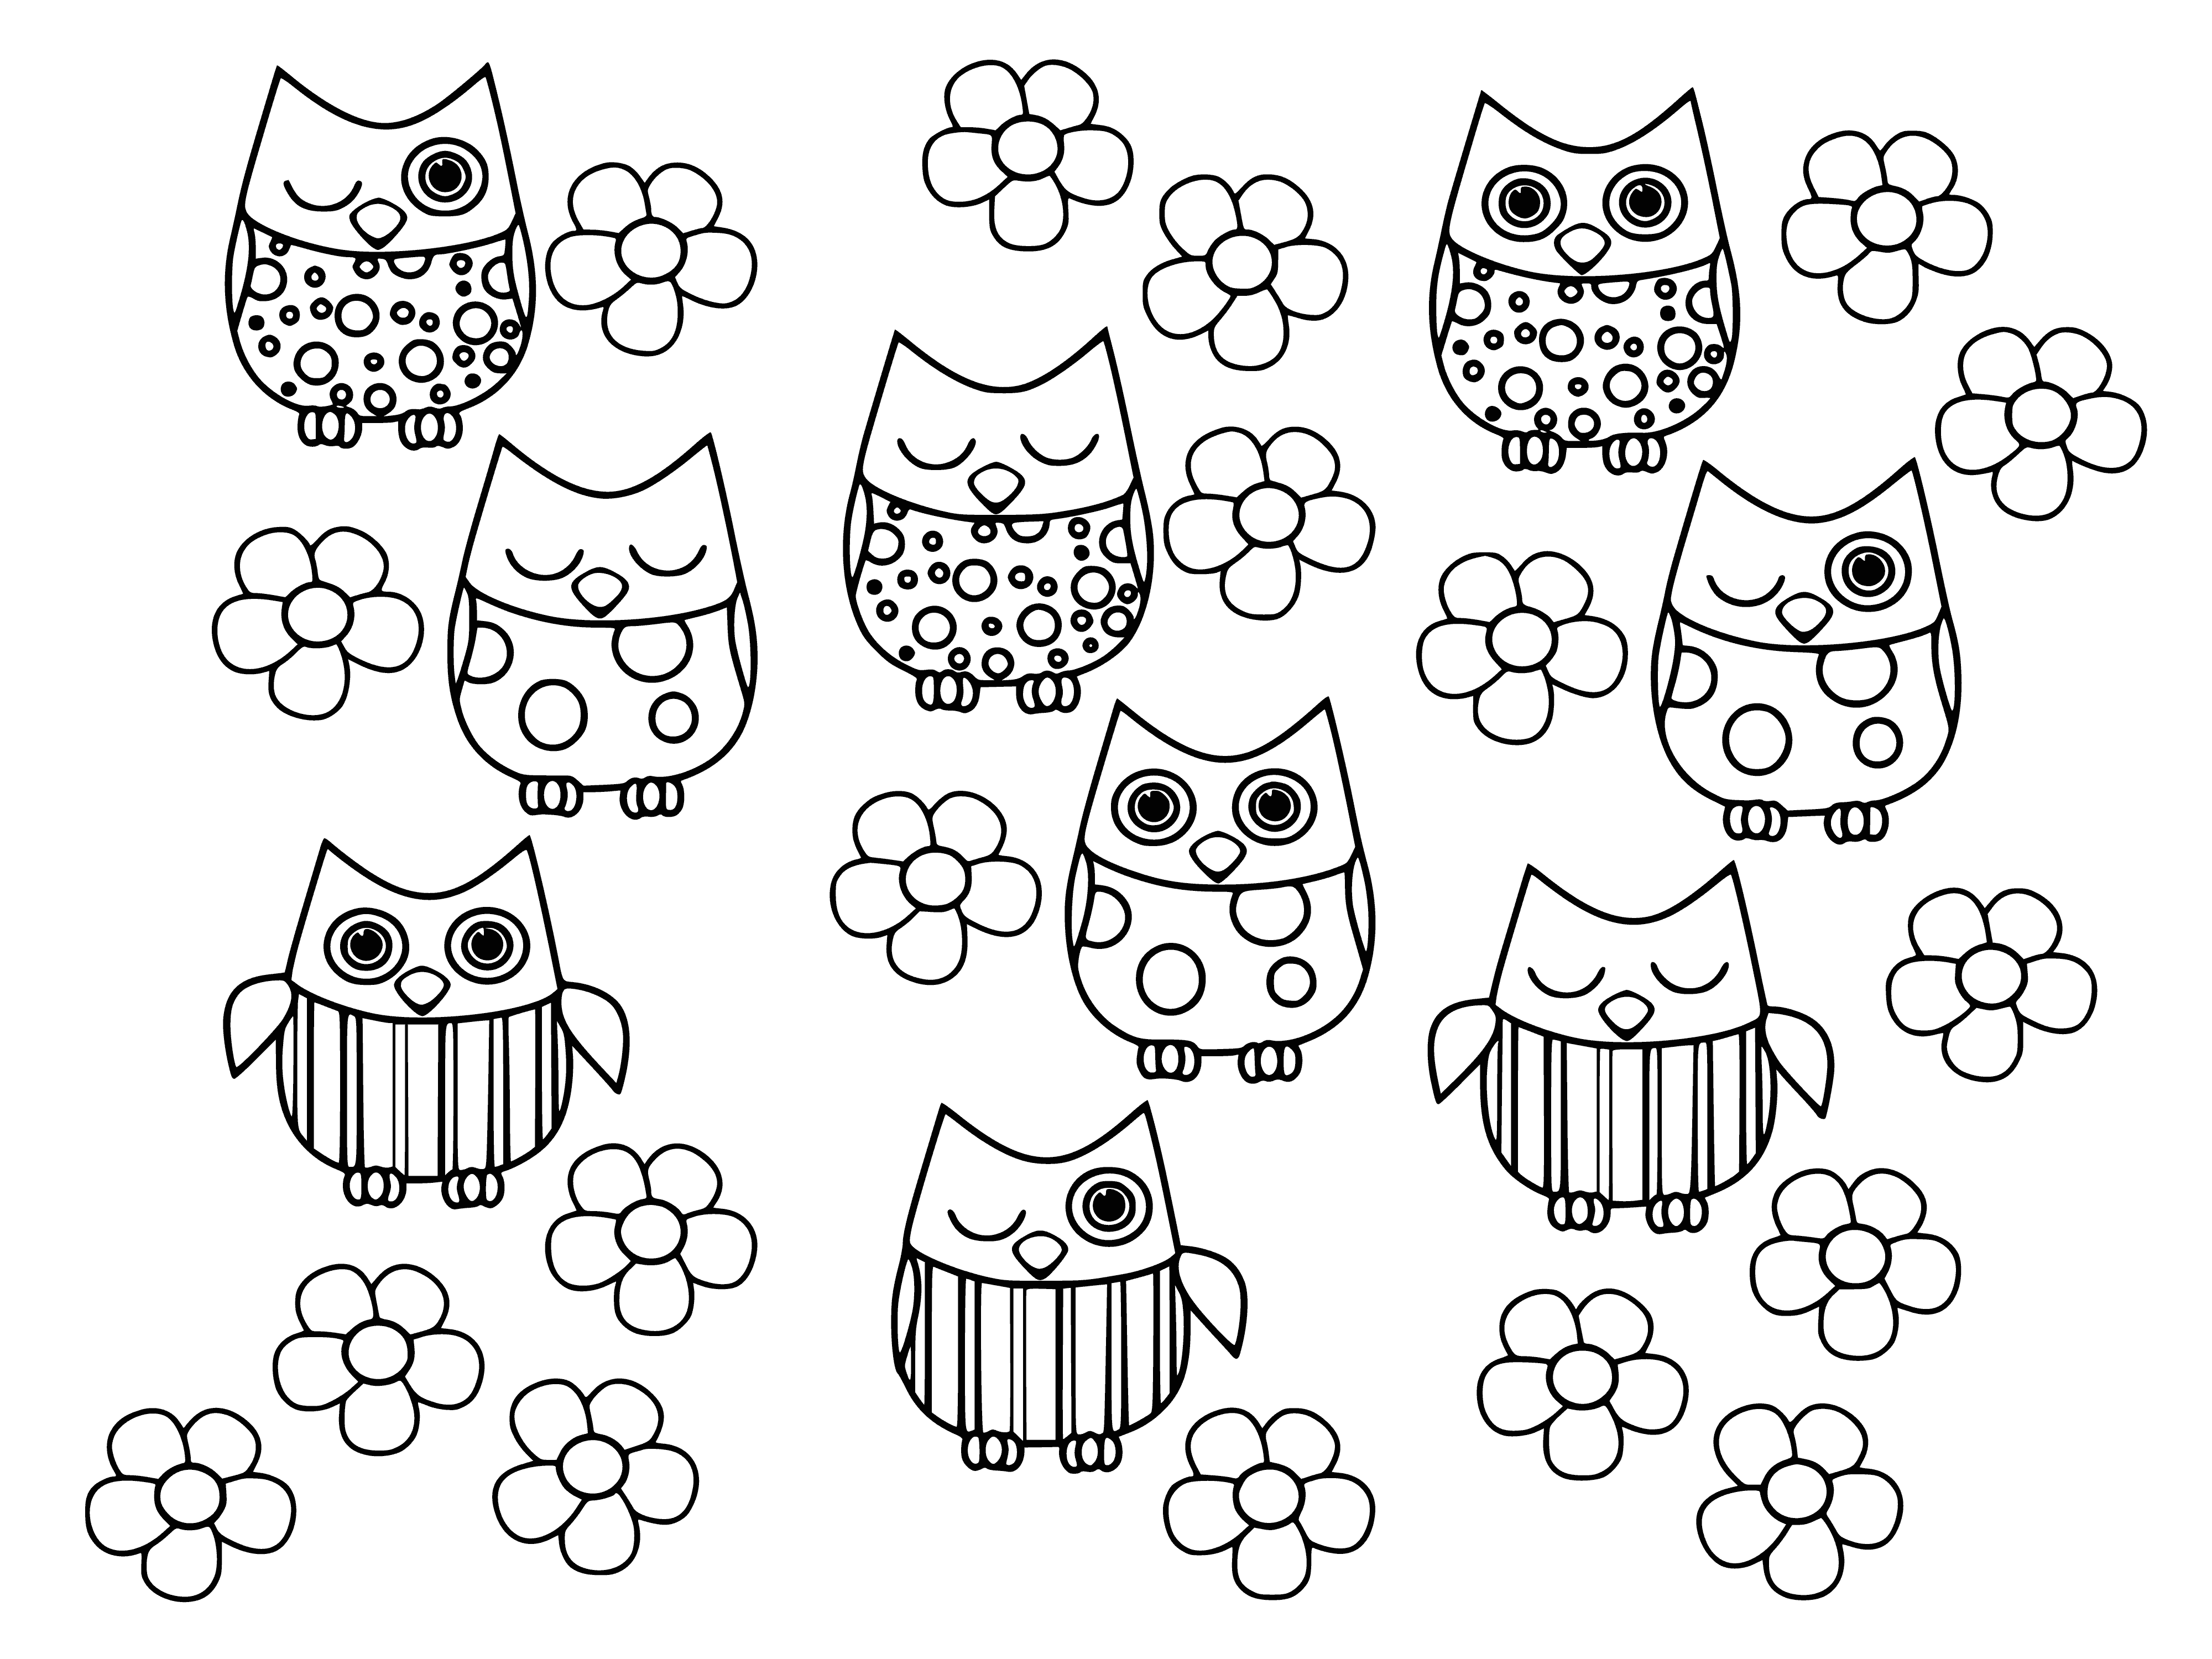 coloring page: Two owls: one brown, one white; one sitting, one flying; perfect for coloring!